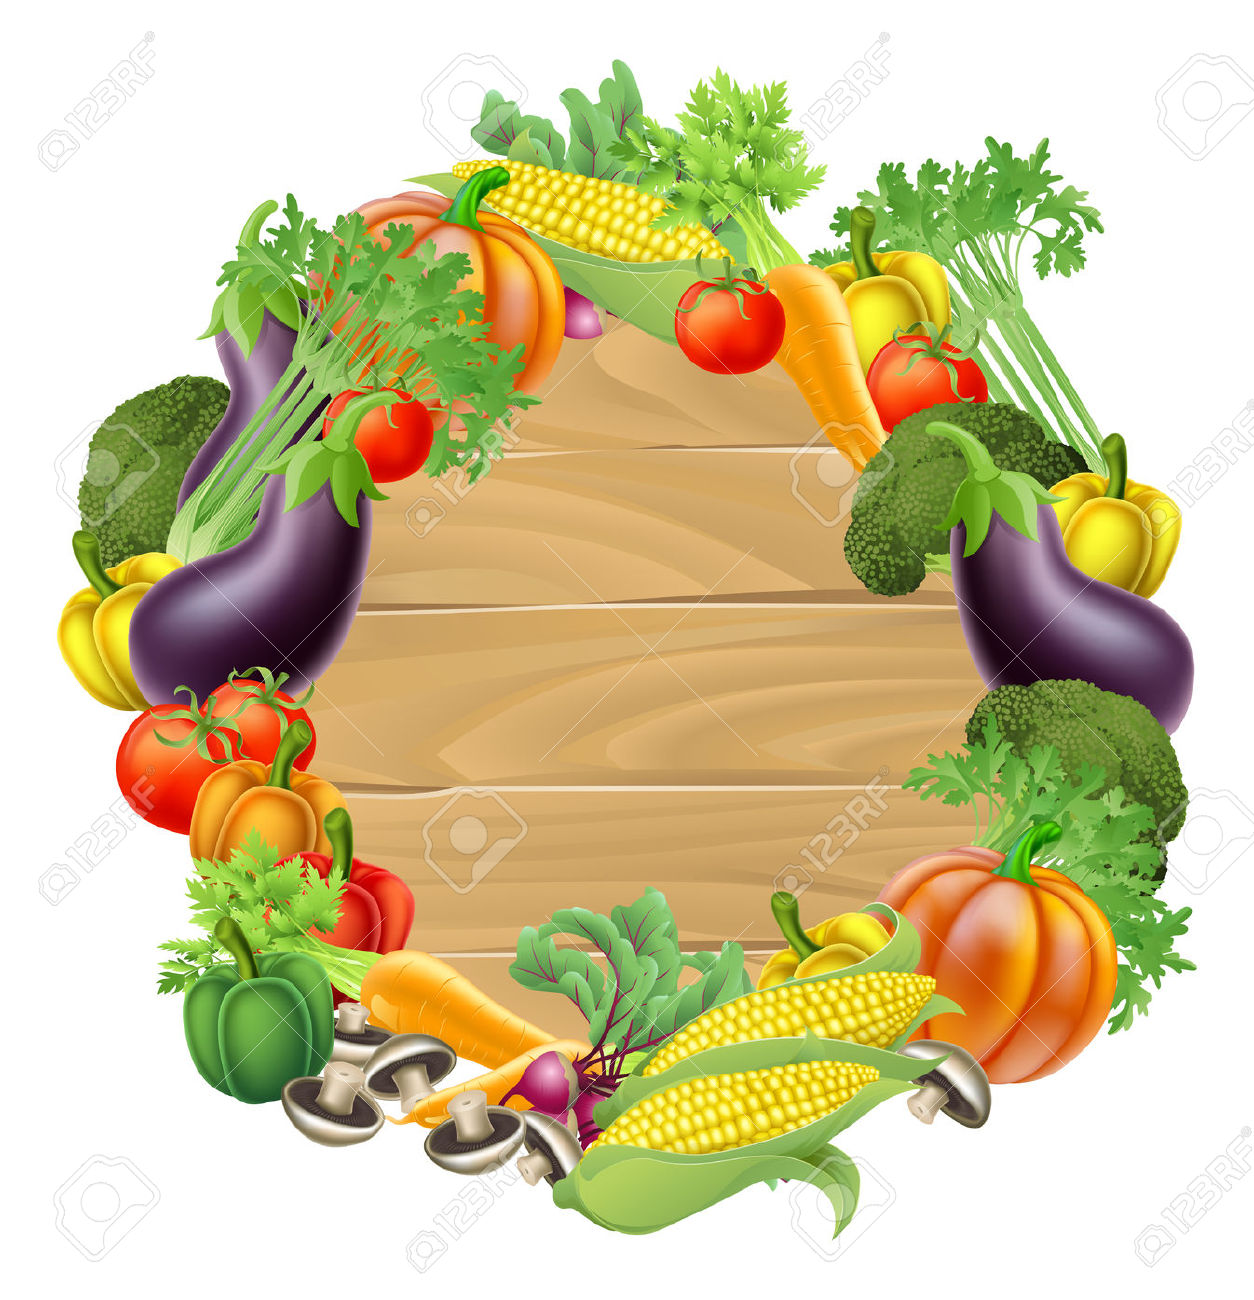 81,080 Fruits Vegetables Stock Vector Illustration And Royalty.